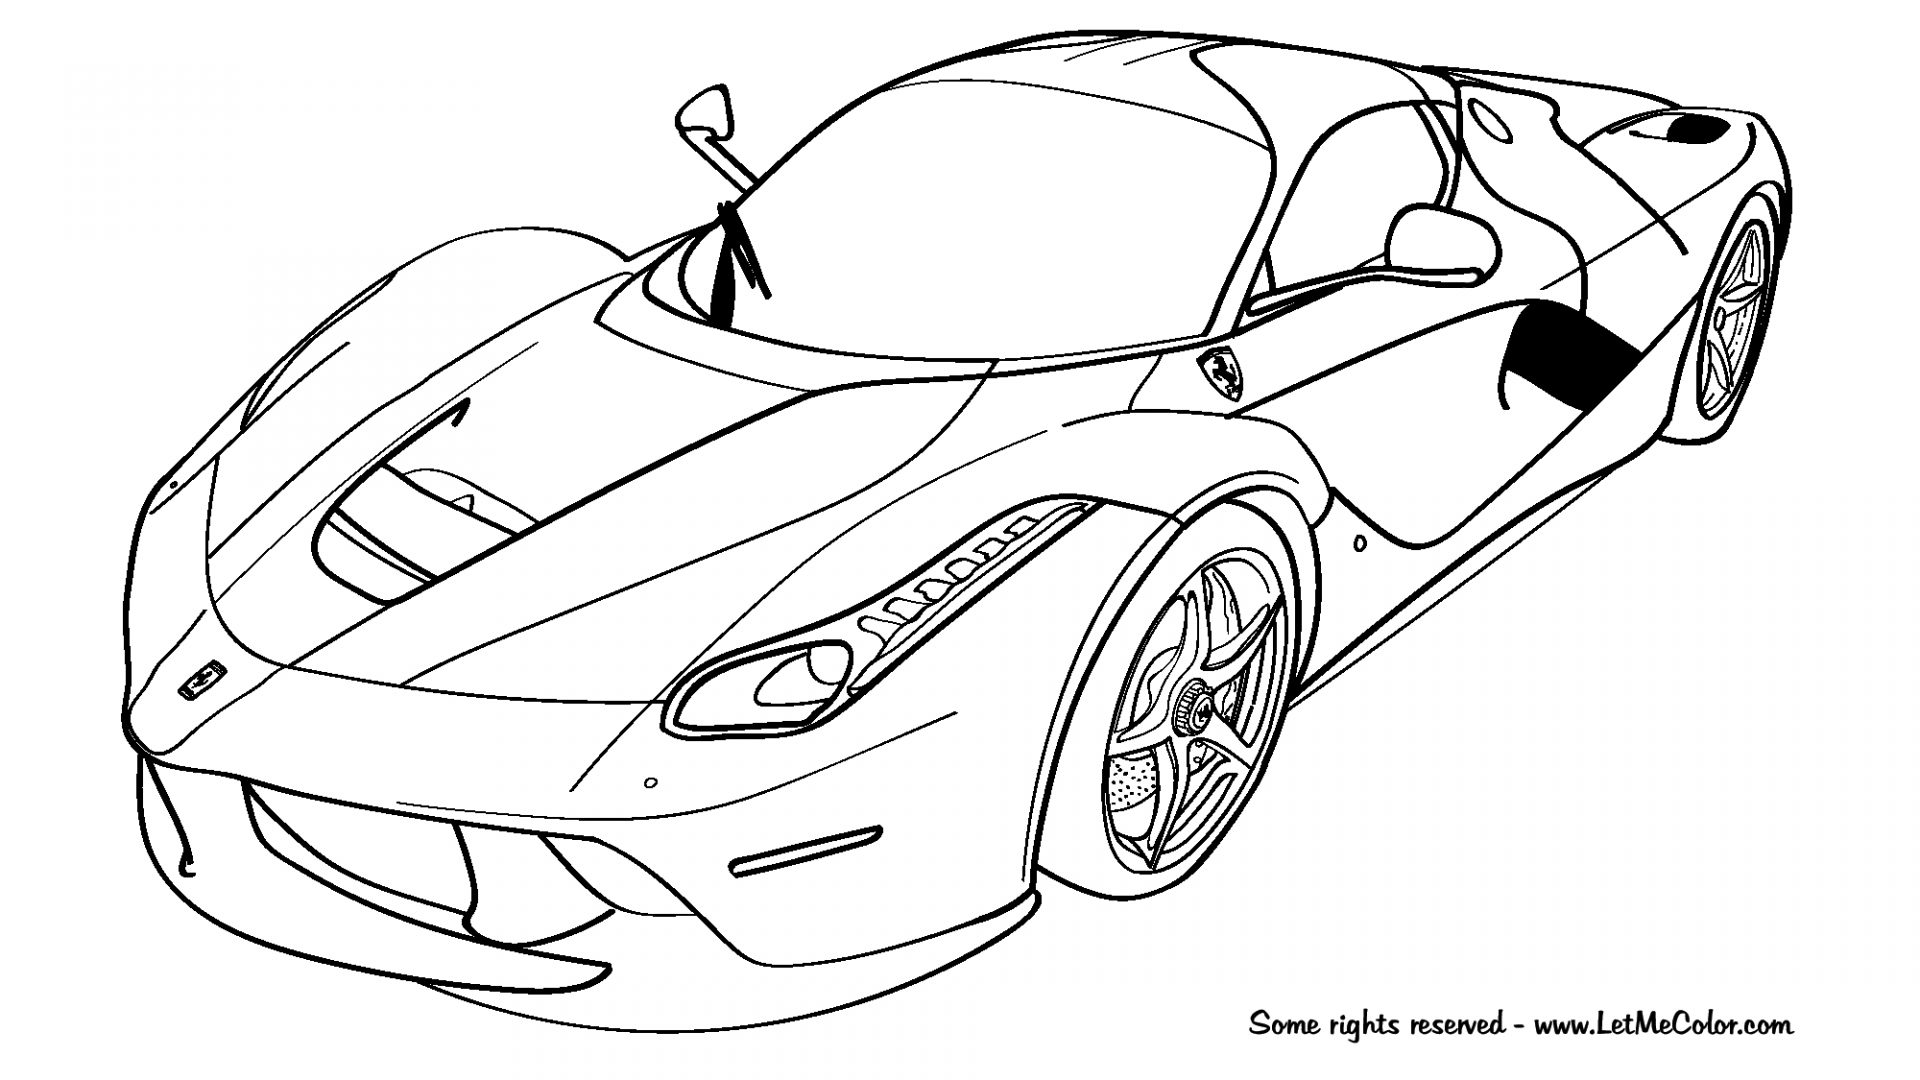 Corvette Coloring Pages At Getcolorings.com | Free Printable Colorings